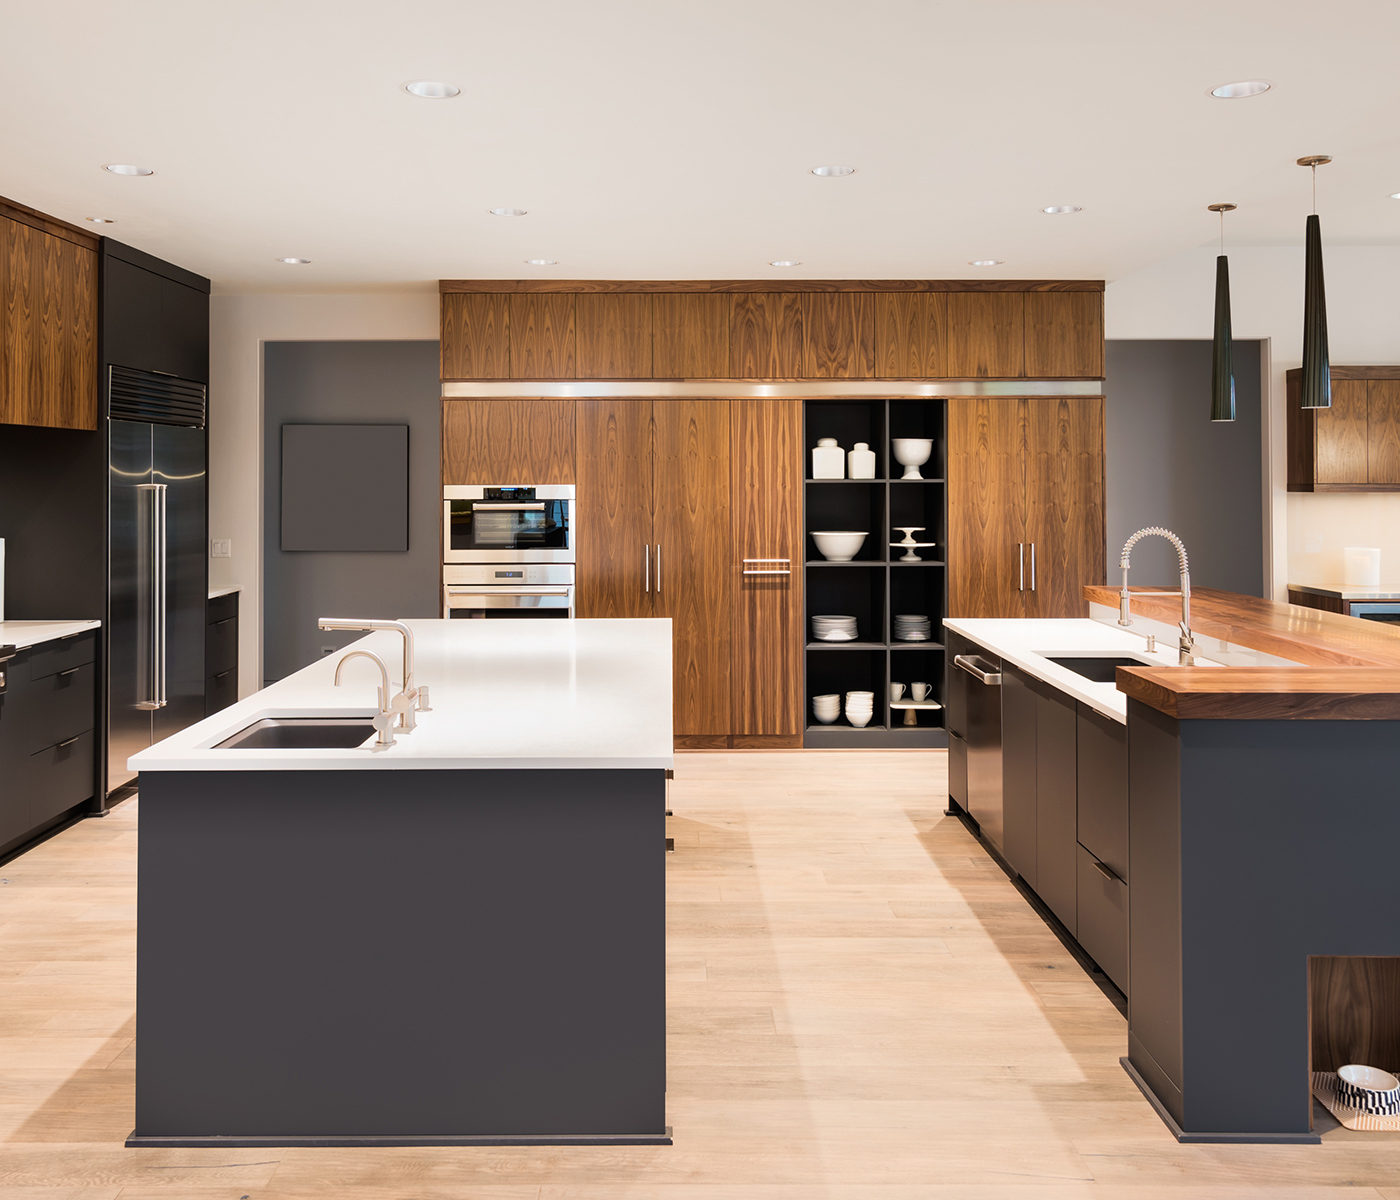 Two island trend in kitchens